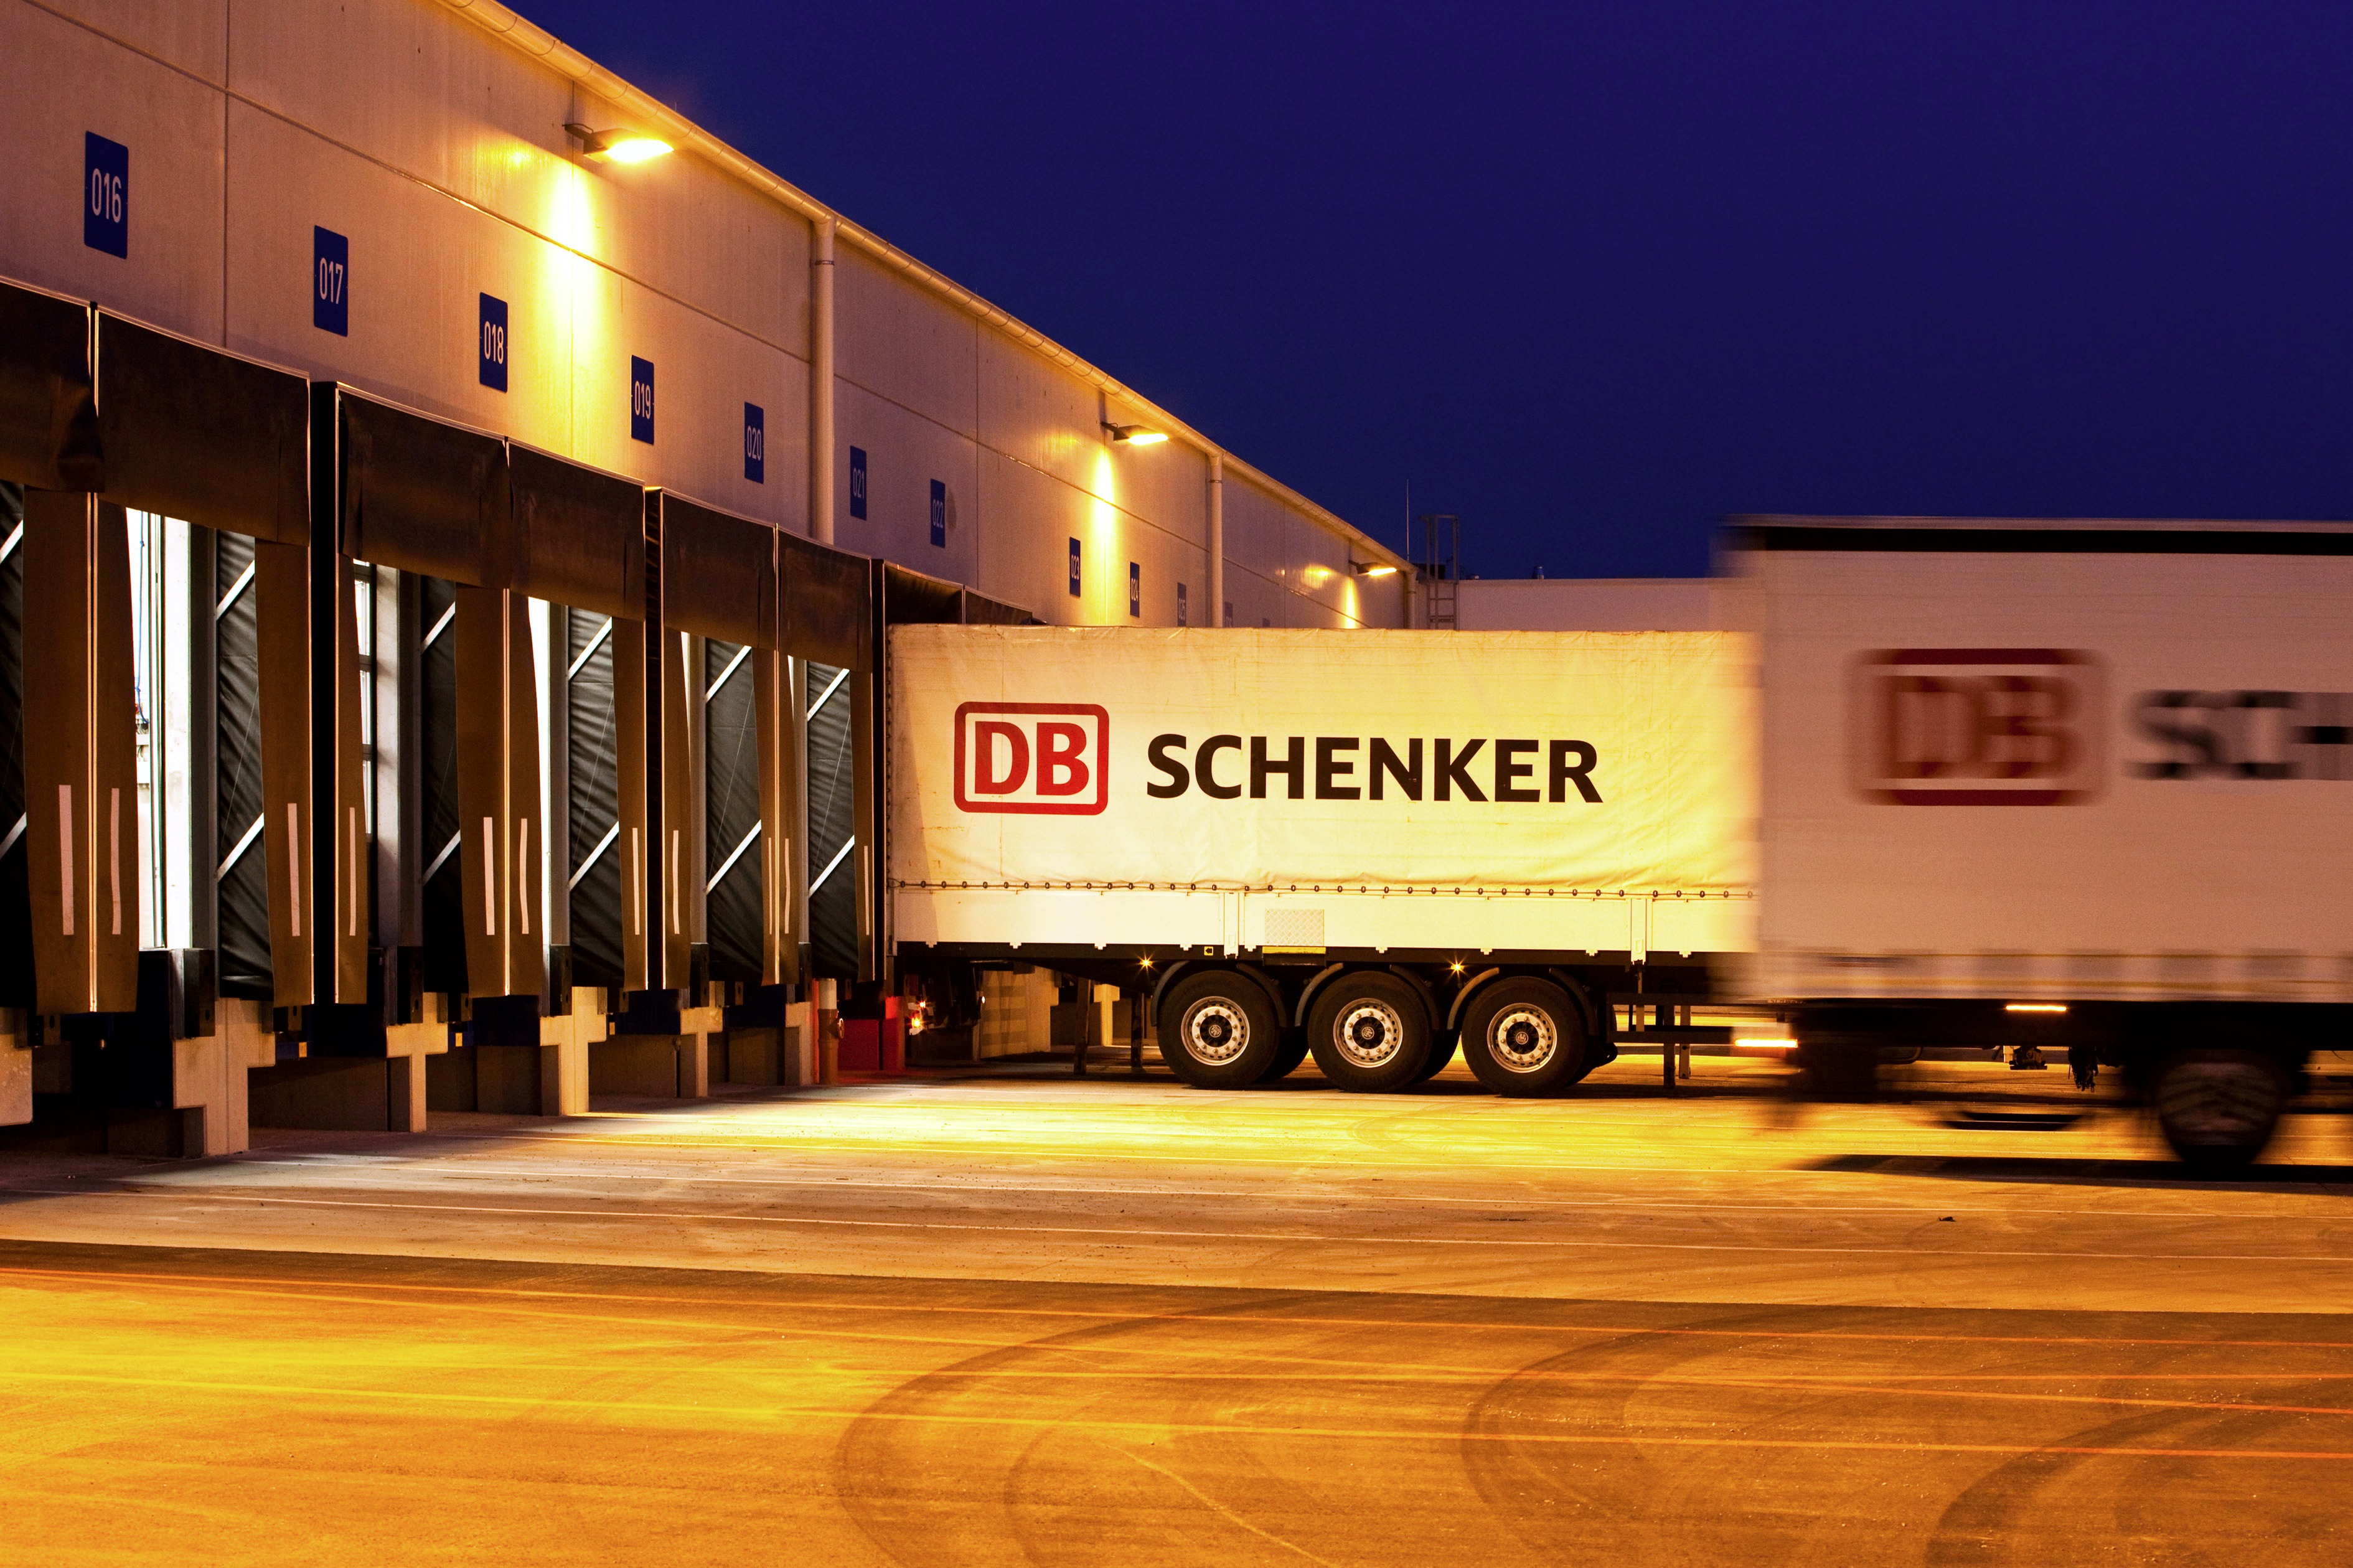 Significant growth in land transport with DB Schenker